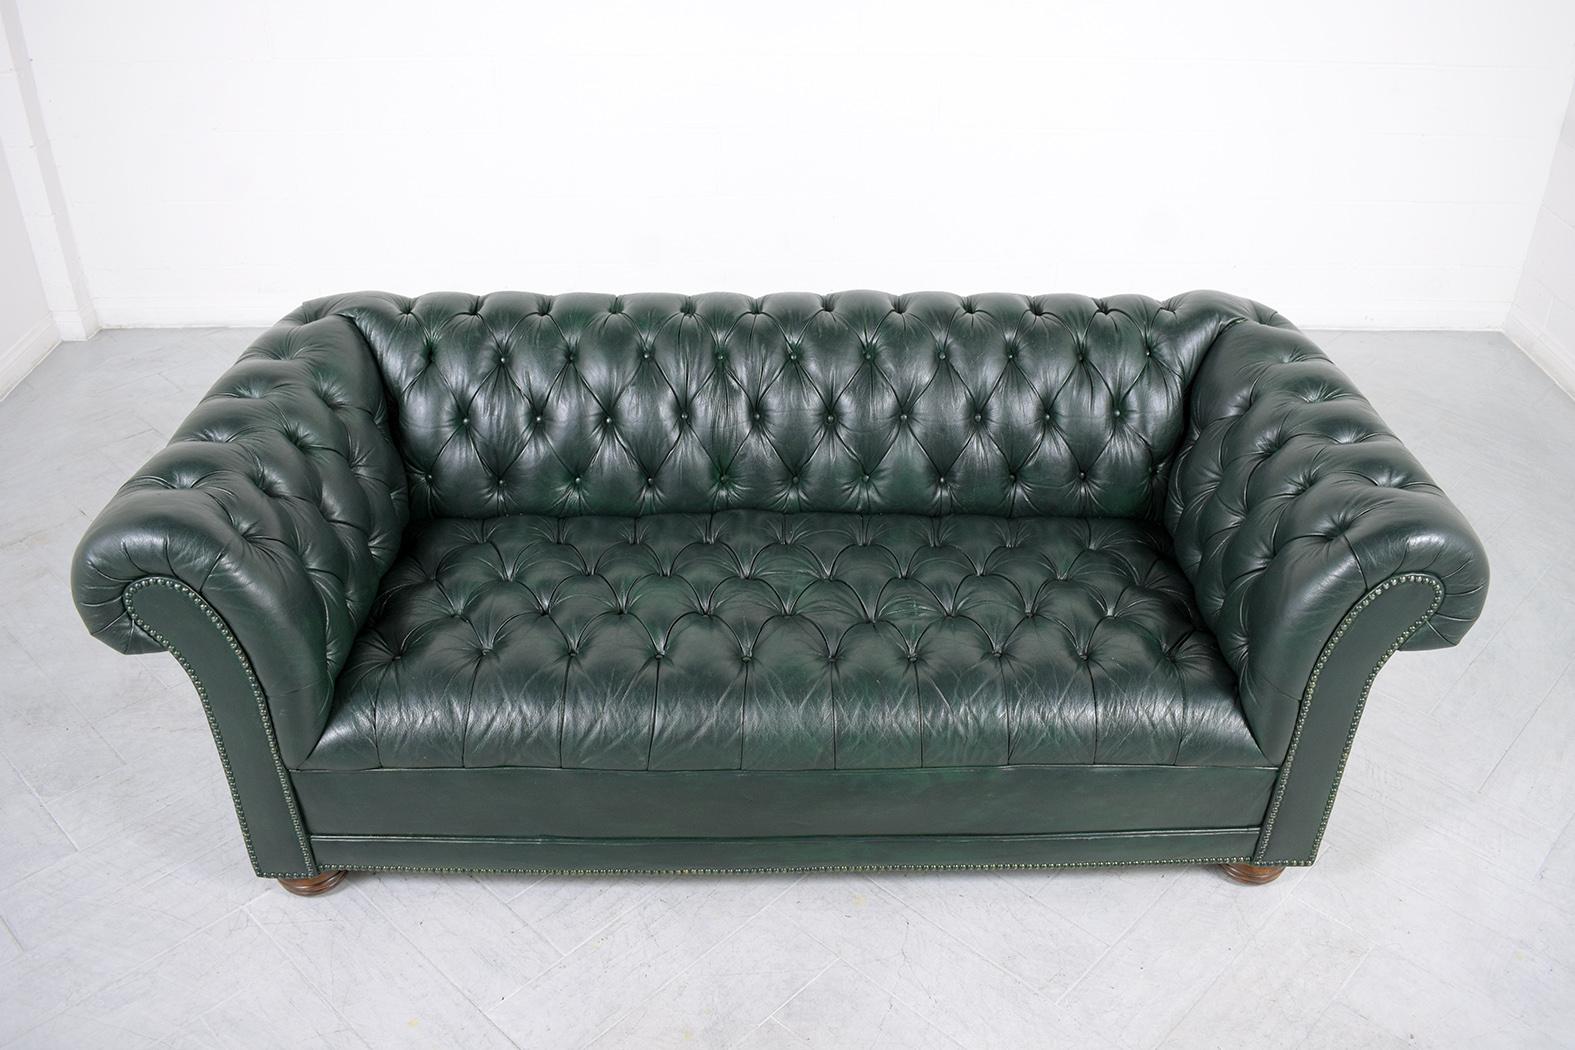 Carved Chesterfield Leather Sofa